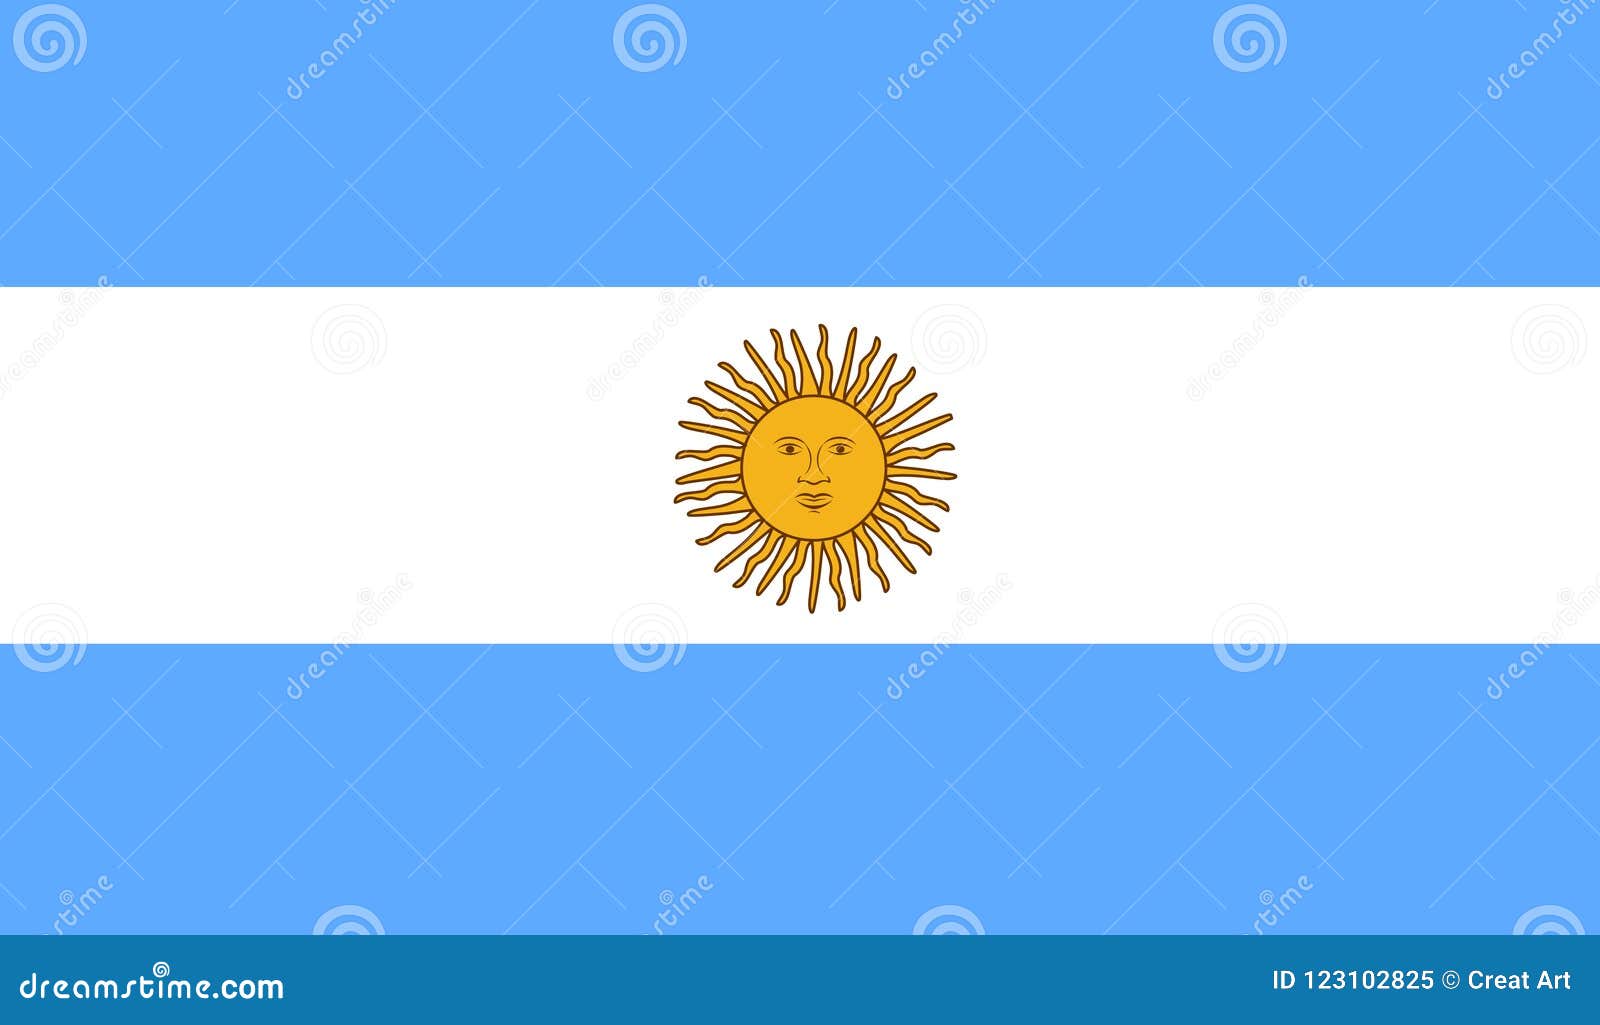 Fan Argentina Vector & Photo (Free Trial)